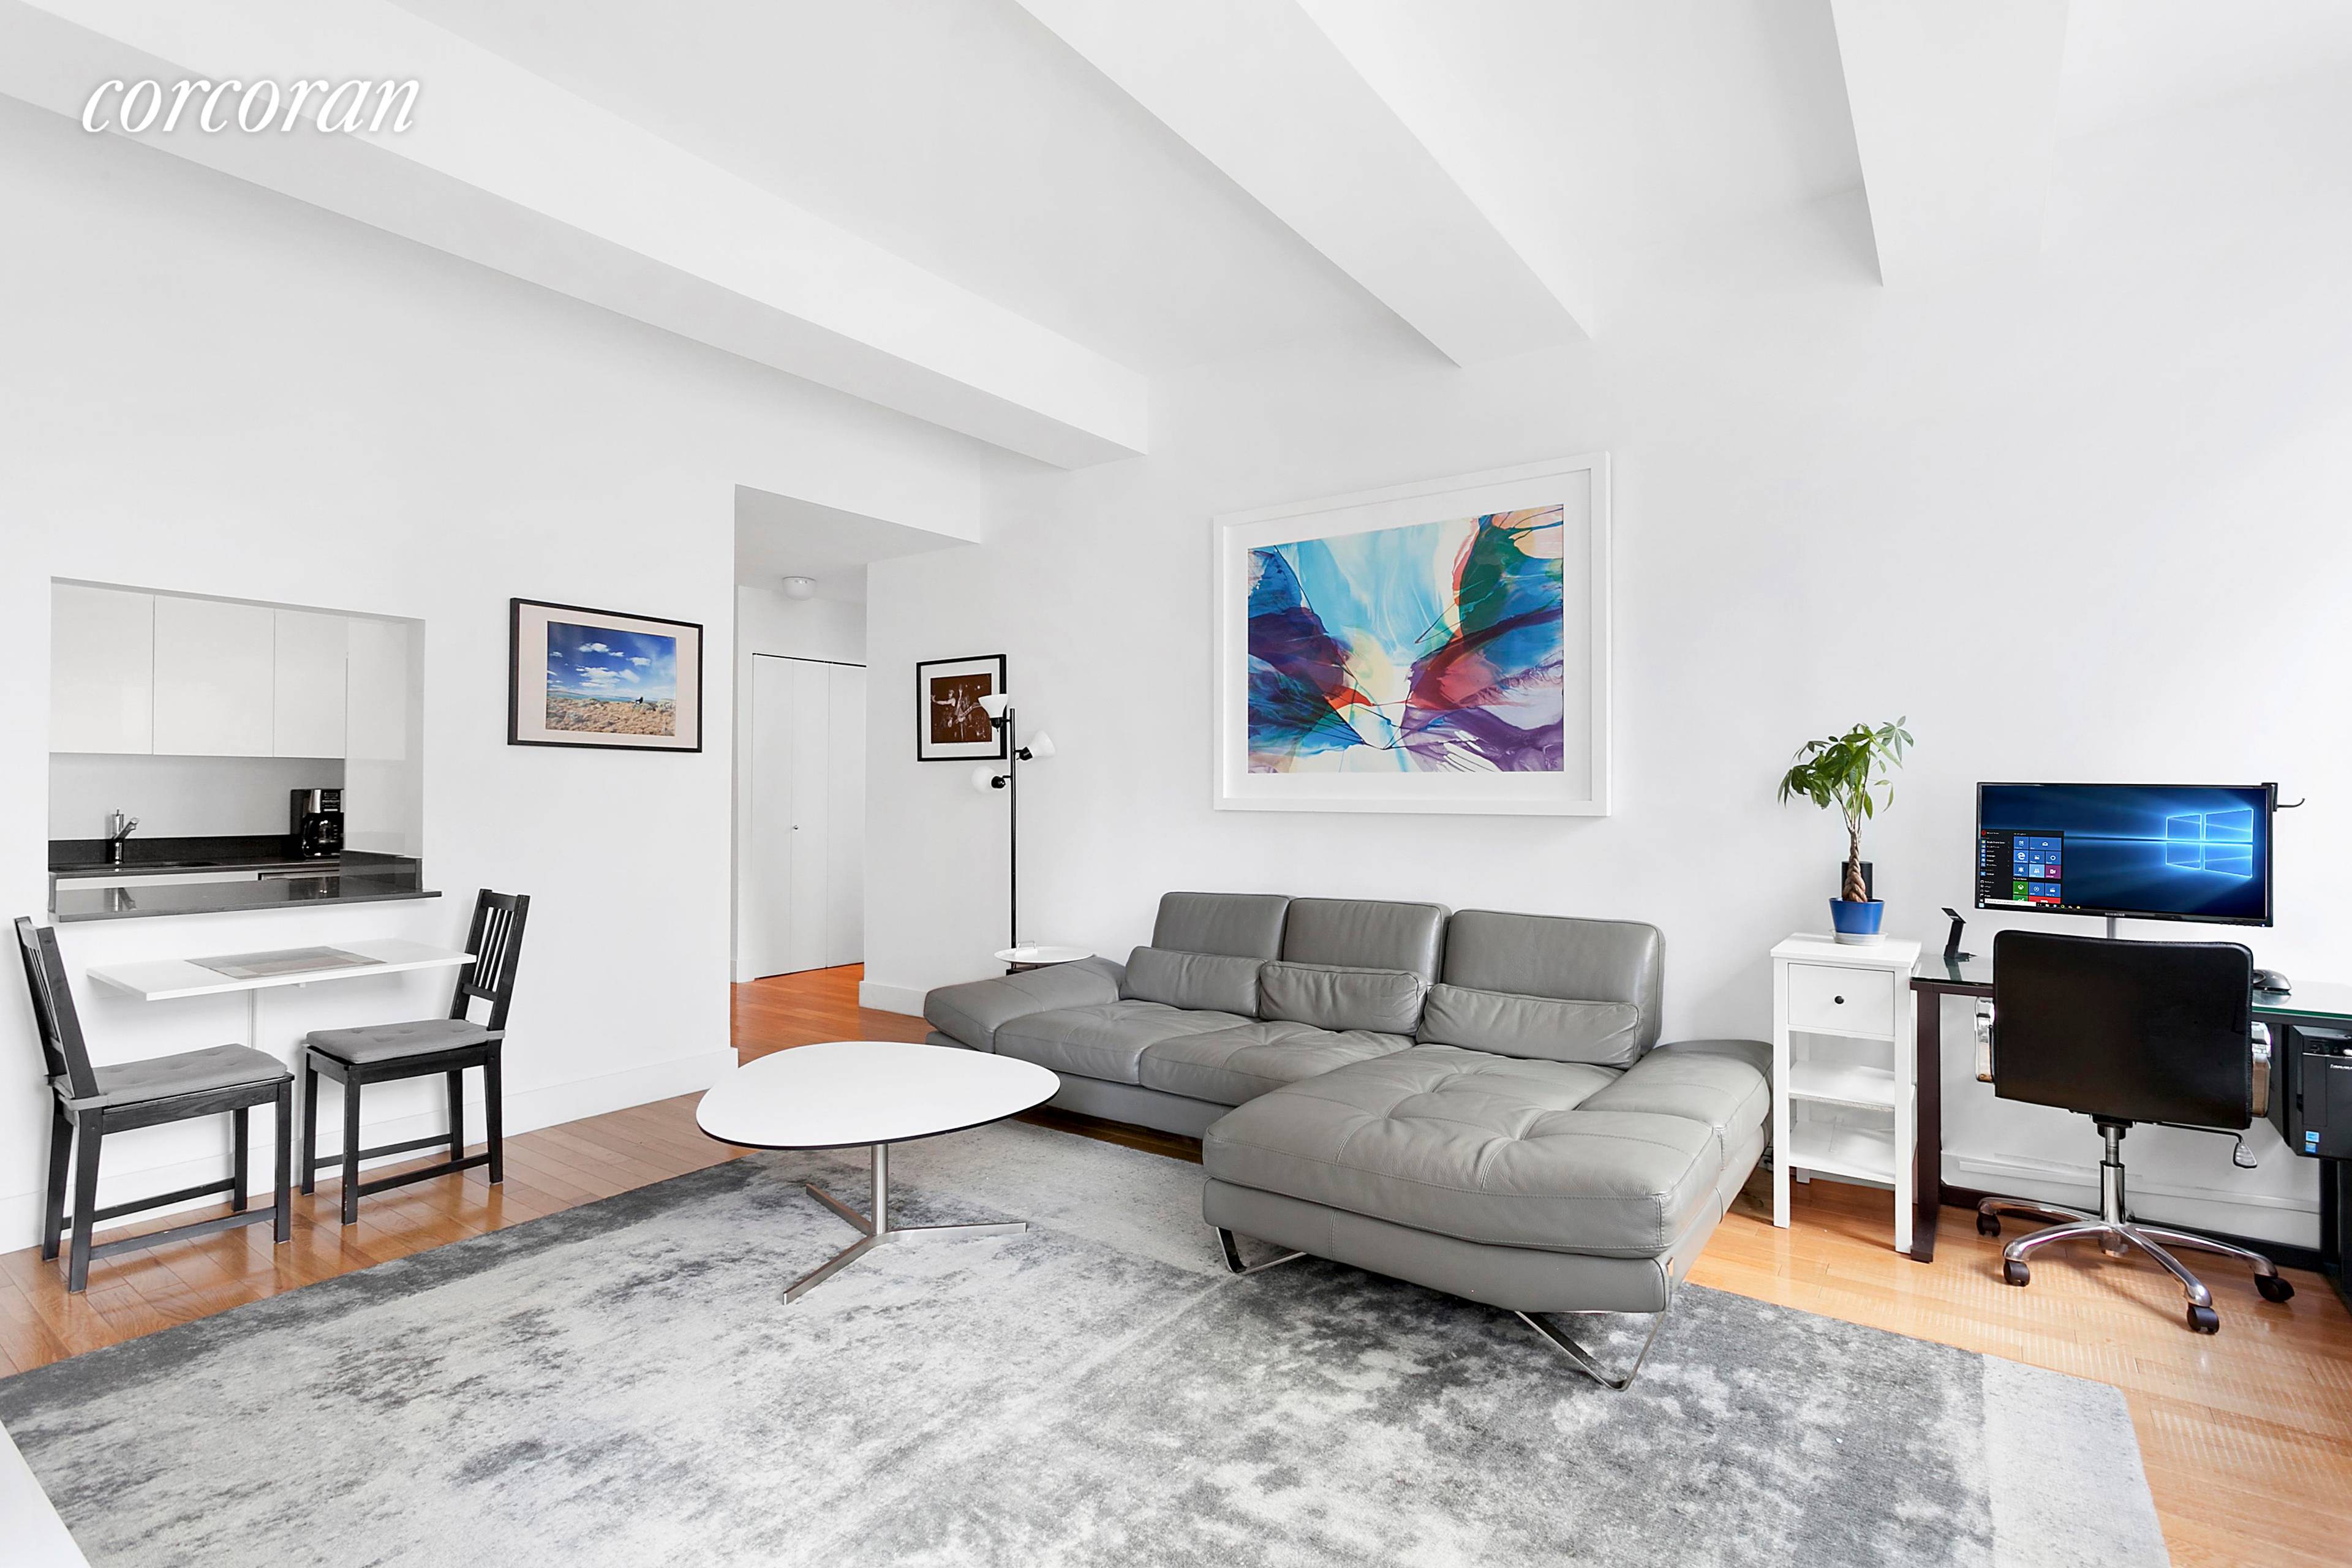 Perched high above the hustle and bustle of ever developing Fidi, Apt 2206 at 99 John Deco Lofts is a south facing sun drenched oasis with its own terrace affording ...